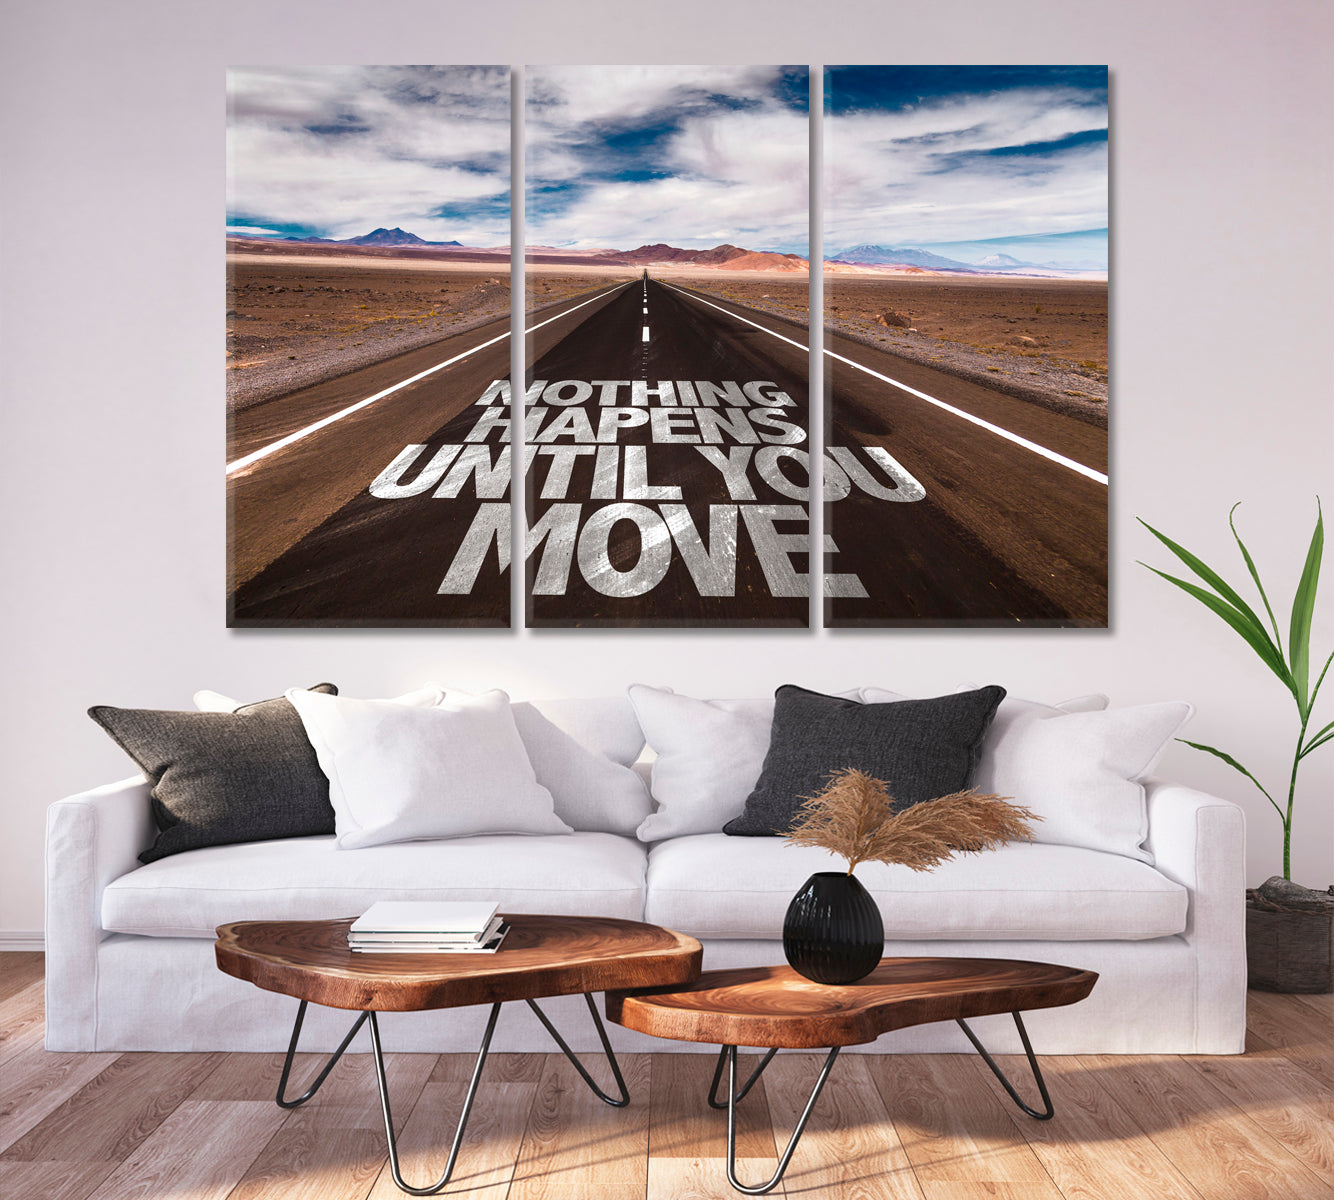 NOTHING HAPPENS UNTIL YOU MOVE  Desert Road Motivation Poster Office Wall Decor Office Wall Art Canvas Print Artesty 3 panels 36" x 24" 